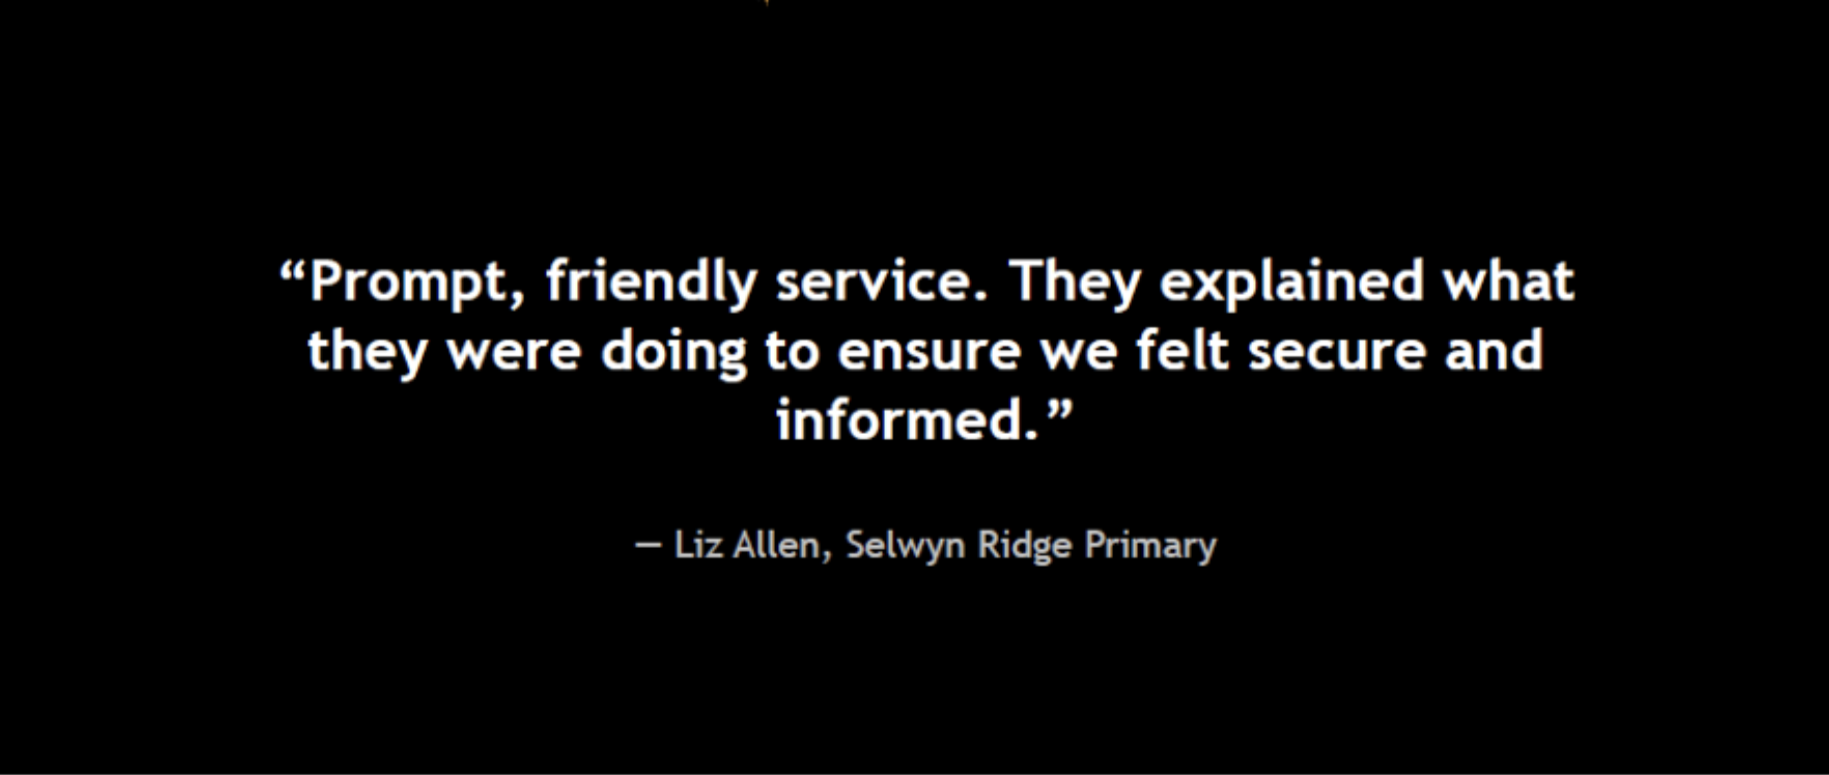 "Prompt, friendly service. They explained what they were doing to ensure we felt secure and informed"